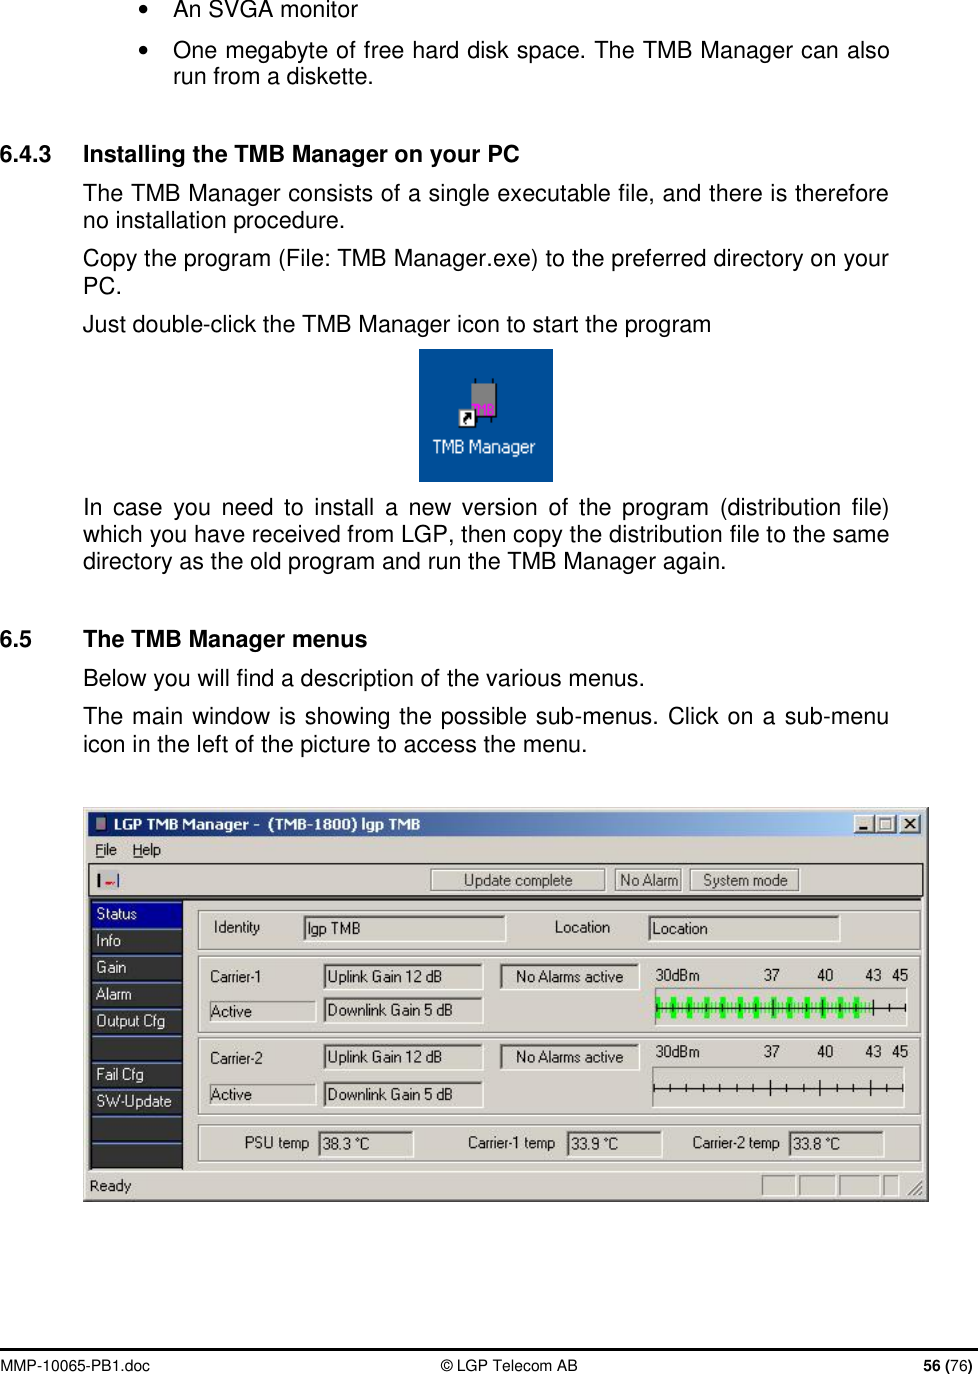  MMP-10065-PB1.doc  © LGP Telecom AB  56 (76)  •  An SVGA monitor  •  One megabyte of free hard disk space. The TMB Manager can also run from a diskette.  6.4.3  Installing the TMB Manager on your PC The TMB Manager consists of a single executable file, and there is therefore no installation procedure.  Copy the program (File: TMB Manager.exe) to the preferred directory on your PC. Just double-click the TMB Manager icon to start the program  In case you need to install a new version of the program (distribution file) which you have received from LGP, then copy the distribution file to the same directory as the old program and run the TMB Manager again.  6.5  The TMB Manager menus Below you will find a description of the various menus.  The main window is showing the possible sub-menus. Click on a sub-menu icon in the left of the picture to access the menu.      